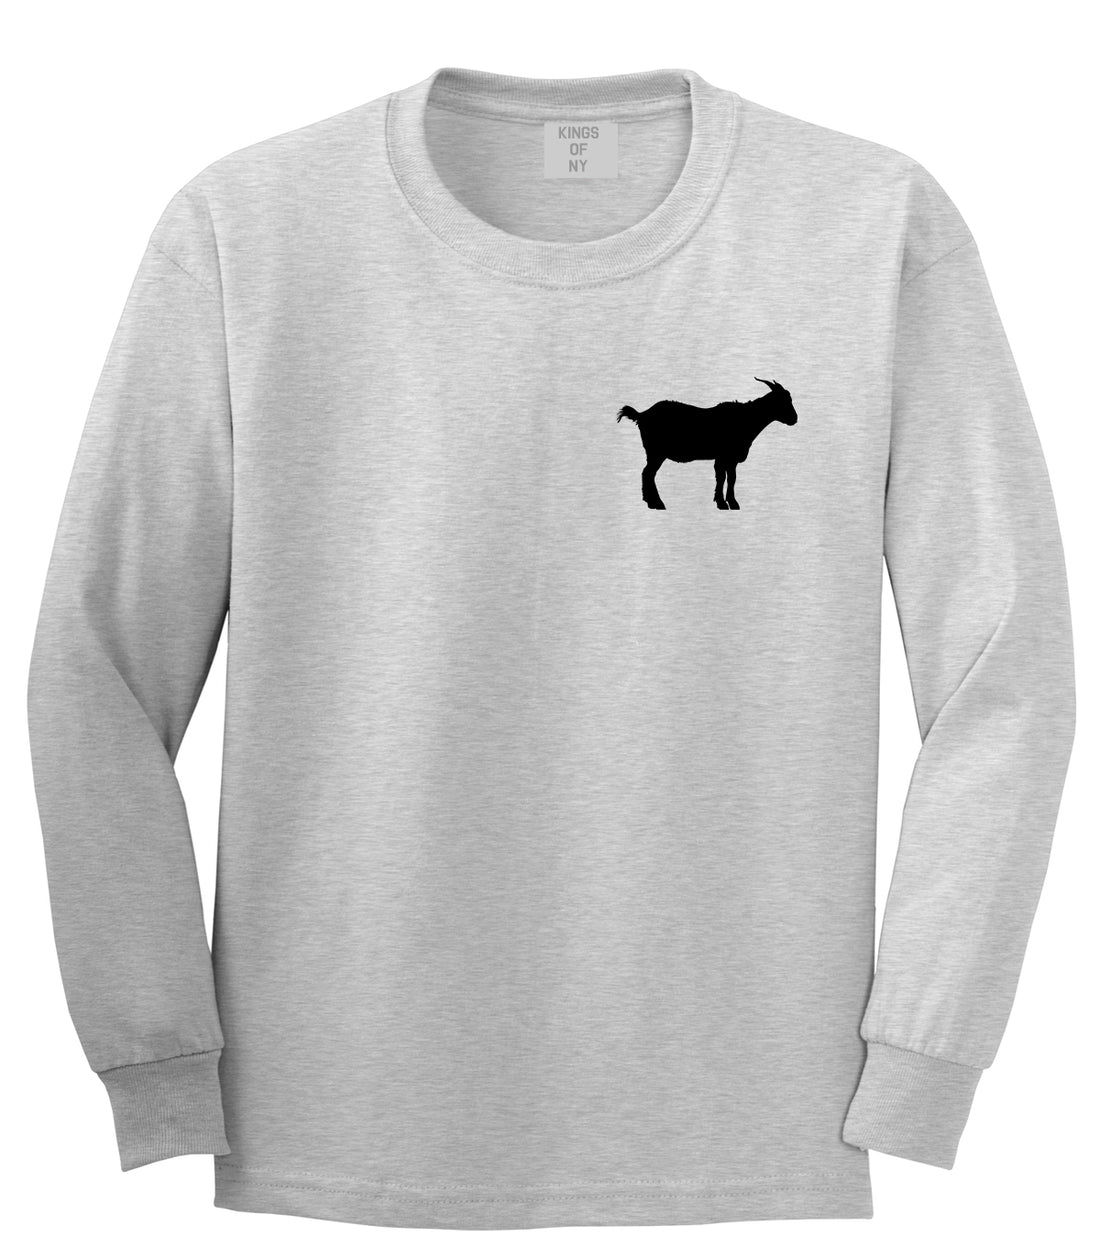 Goat Animal Chest Mens Grey Long Sleeve T-Shirt by KINGS OF NY